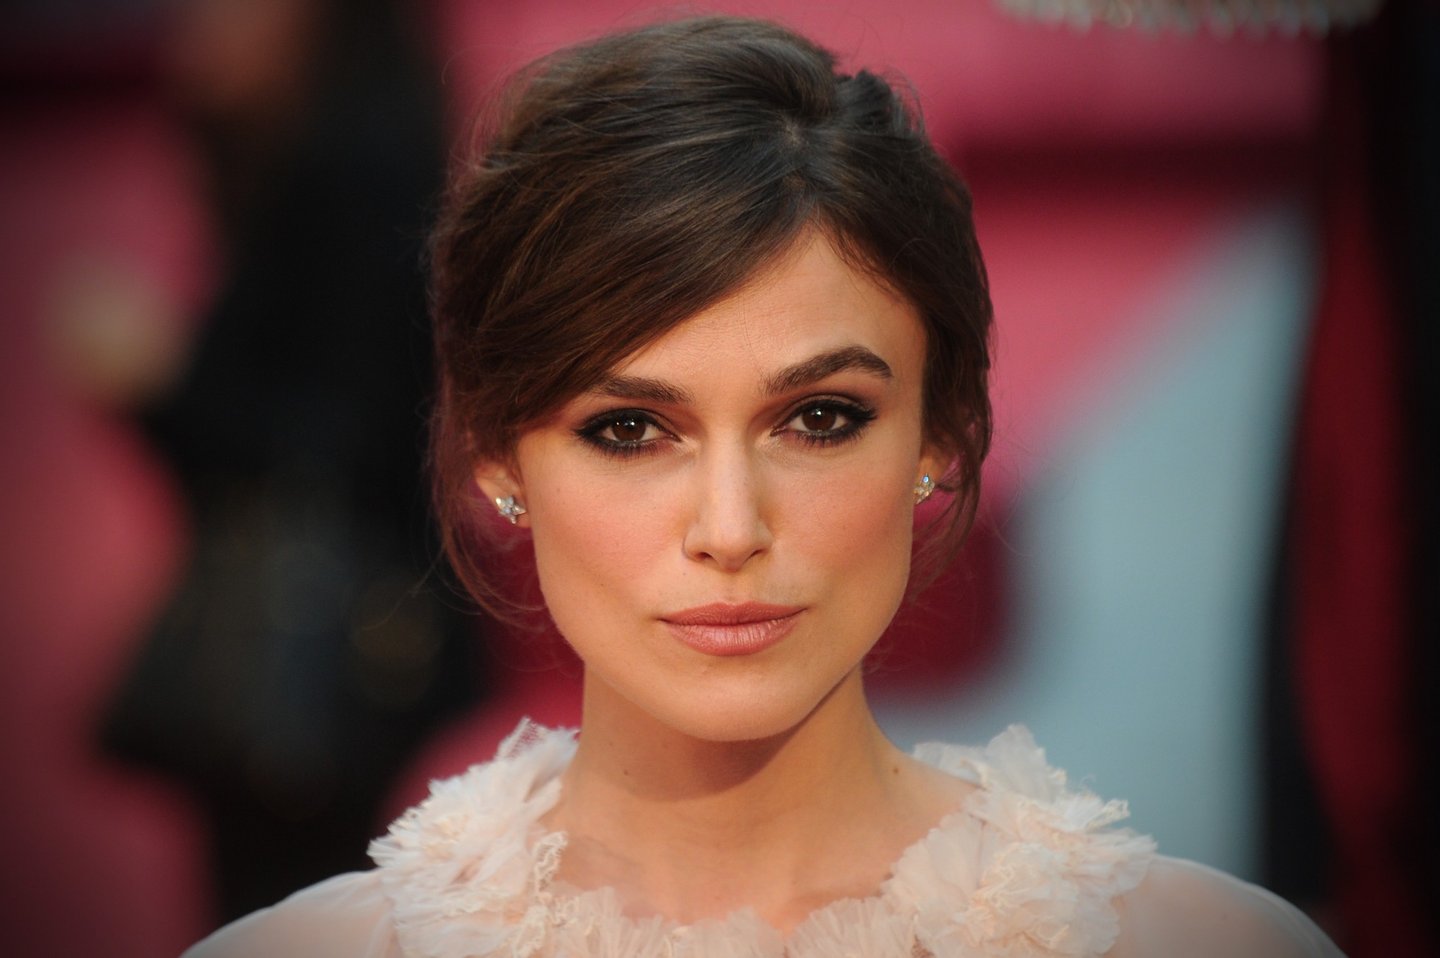 British actress Keira Knightley attends the worldwide premiere of 'Anna Karenina' in central London on September 4, 2012. AFP PHOTO/CARL COURT (Photo credit should read CARL COURT/AFP/GettyImages)